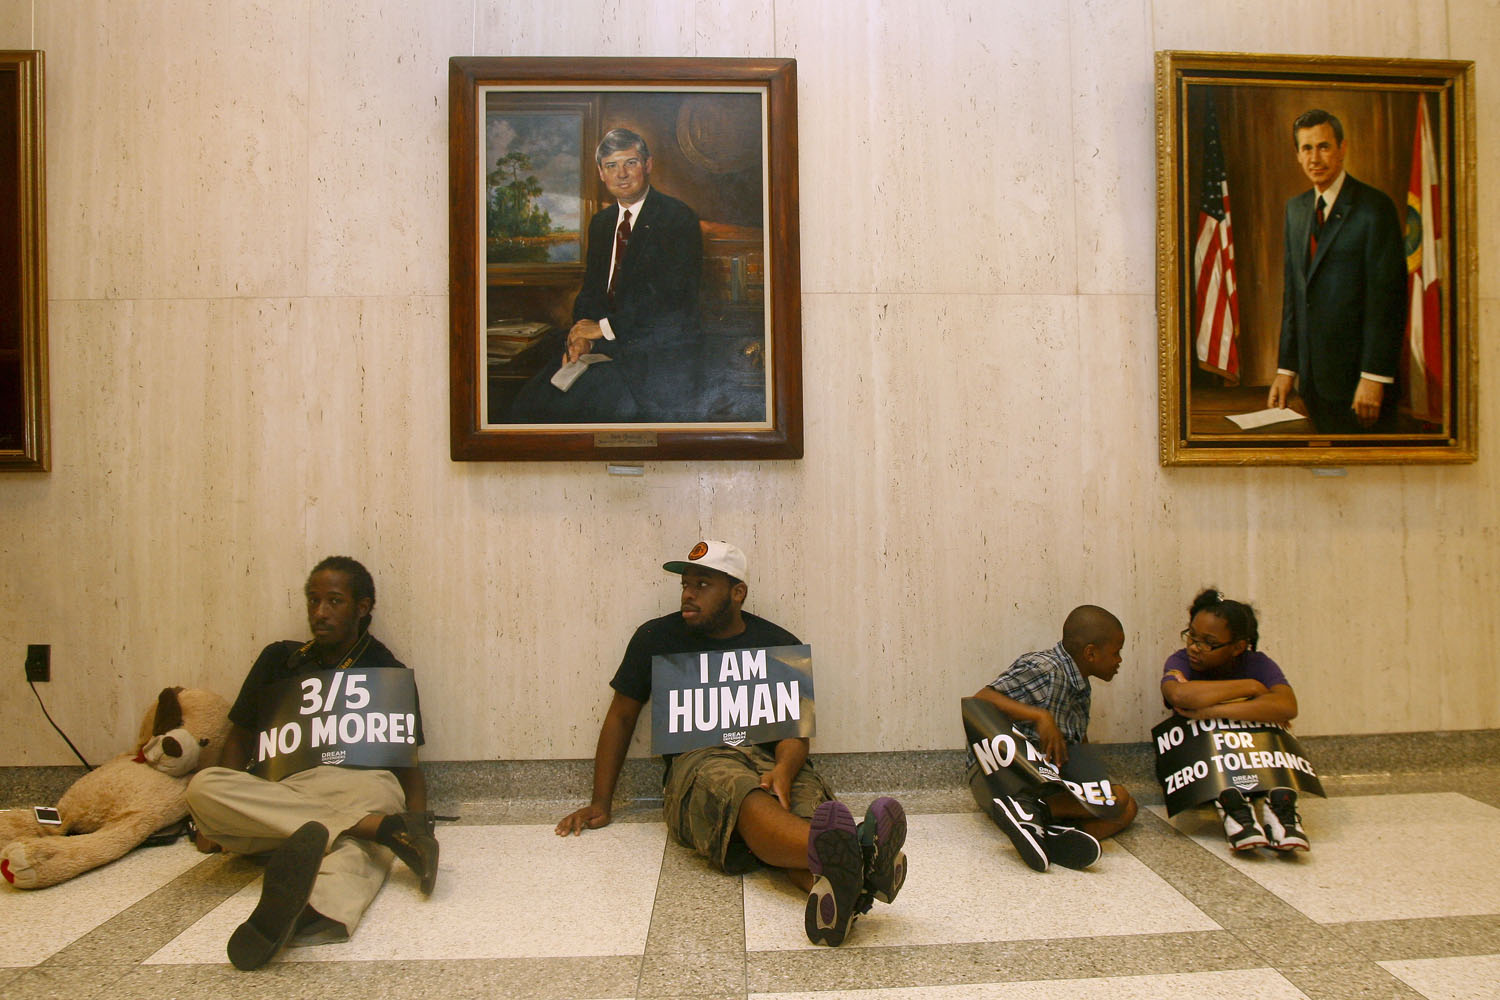 July 17, 2013. Under portraits of former Florida Governors Bob Graham and Reuben Askew, protestors sit on the floor outside Florida Gov. Rick Scott's office at the Capitol in Tallahassee.